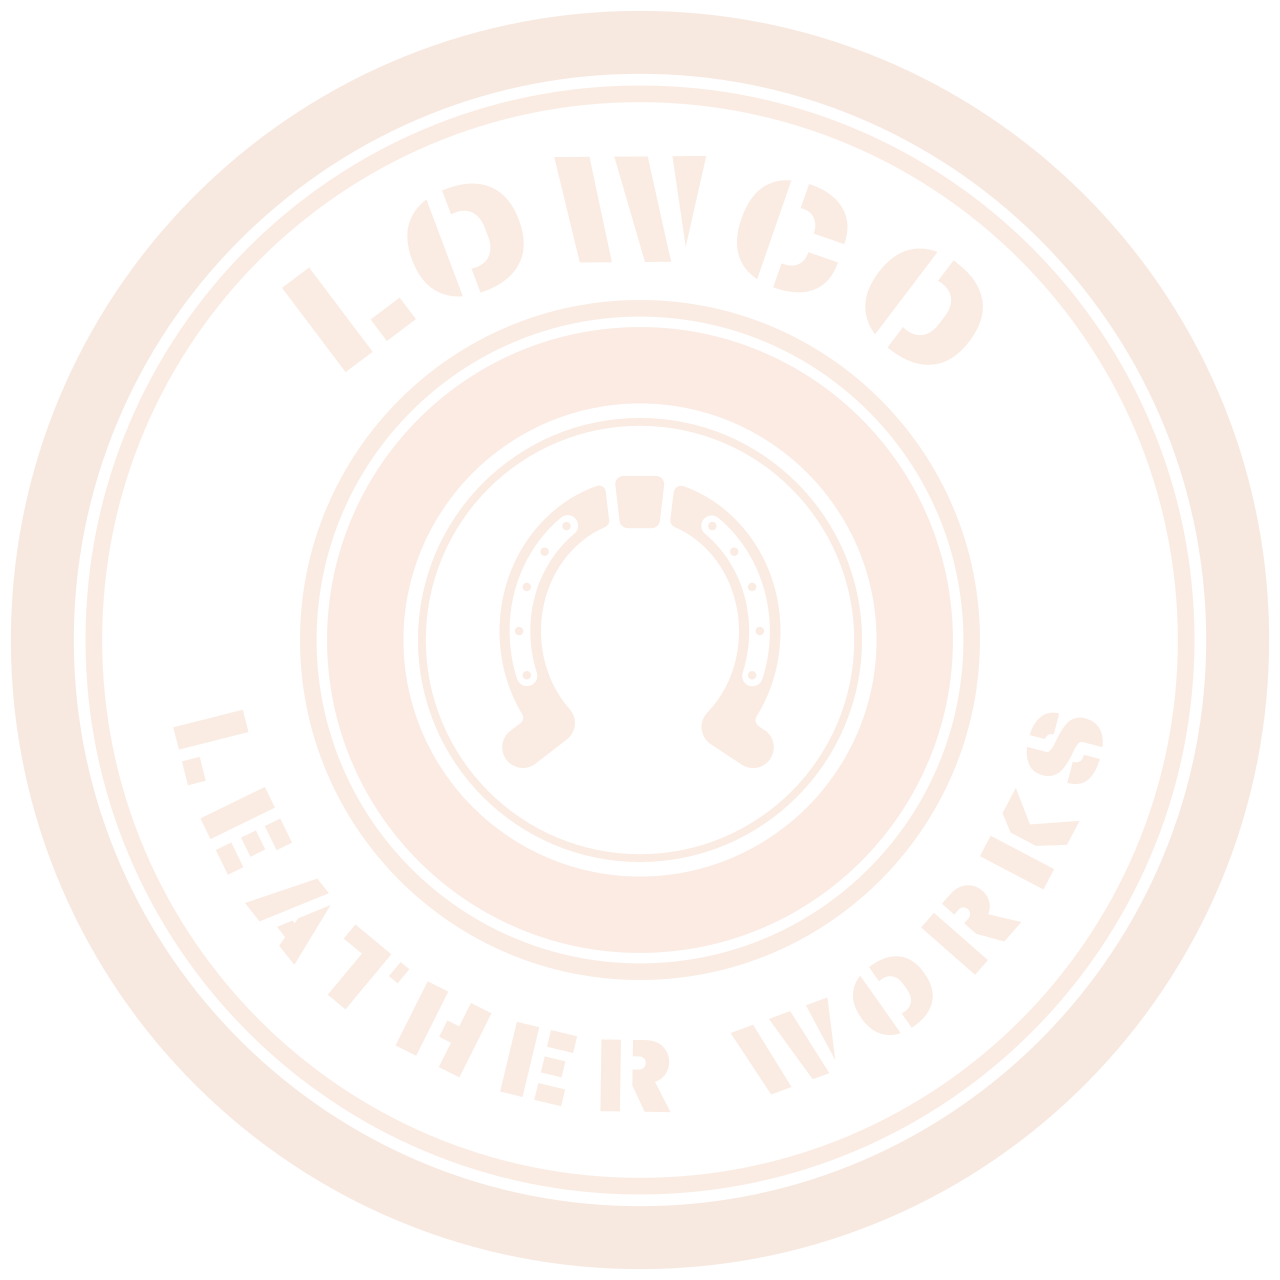 LEATHER WORKS's logo